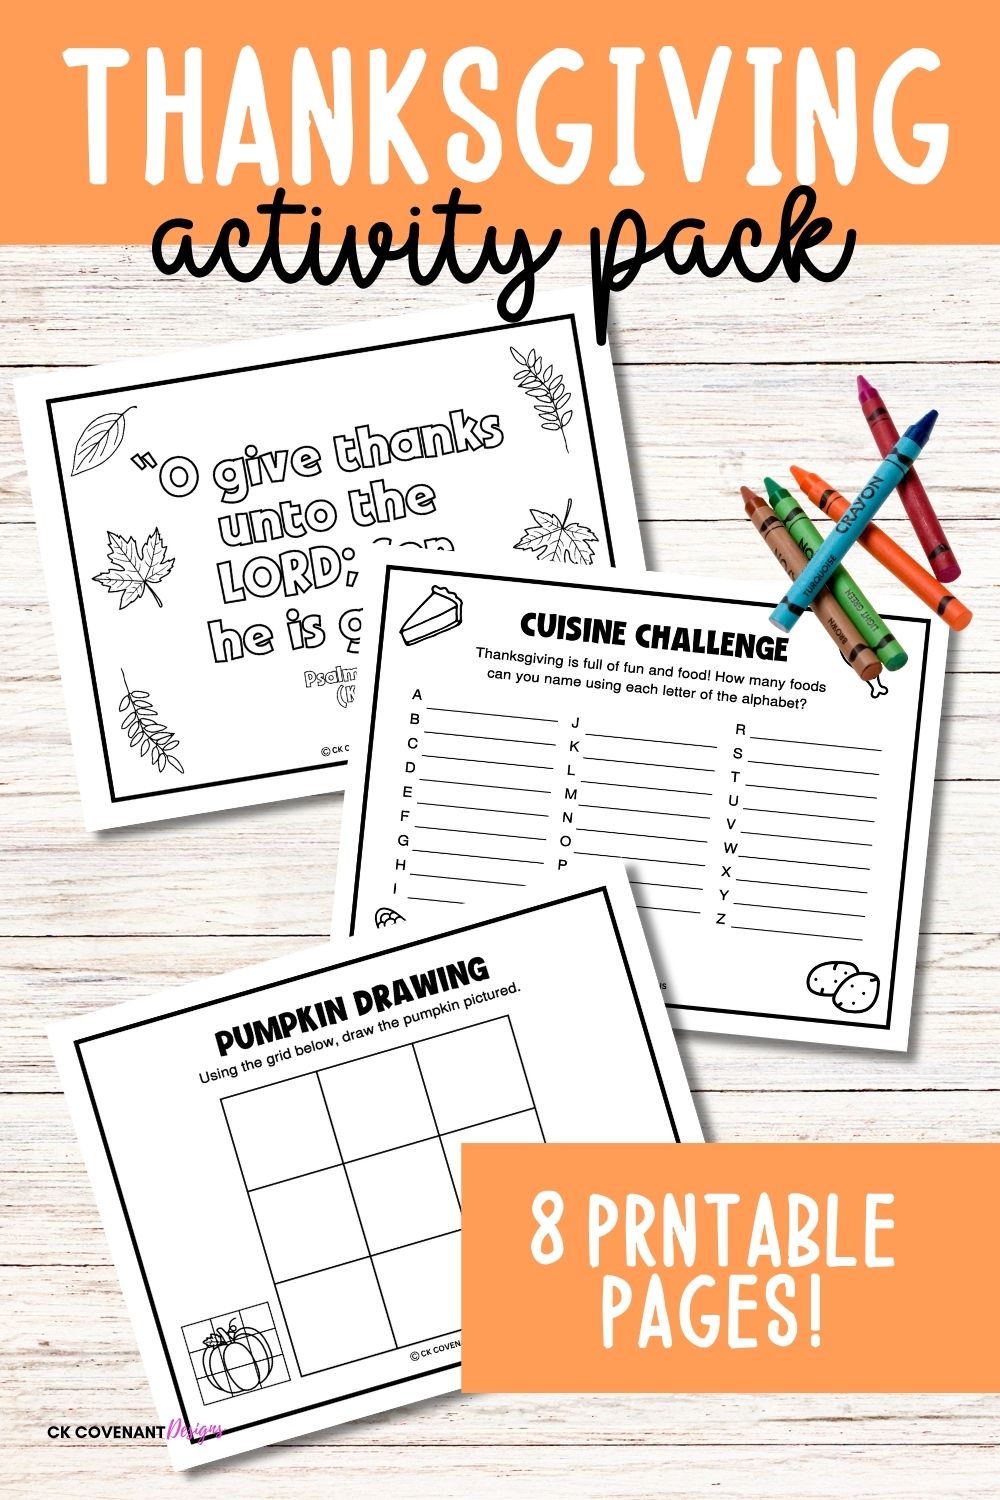 Thanksgiving Activity Pack